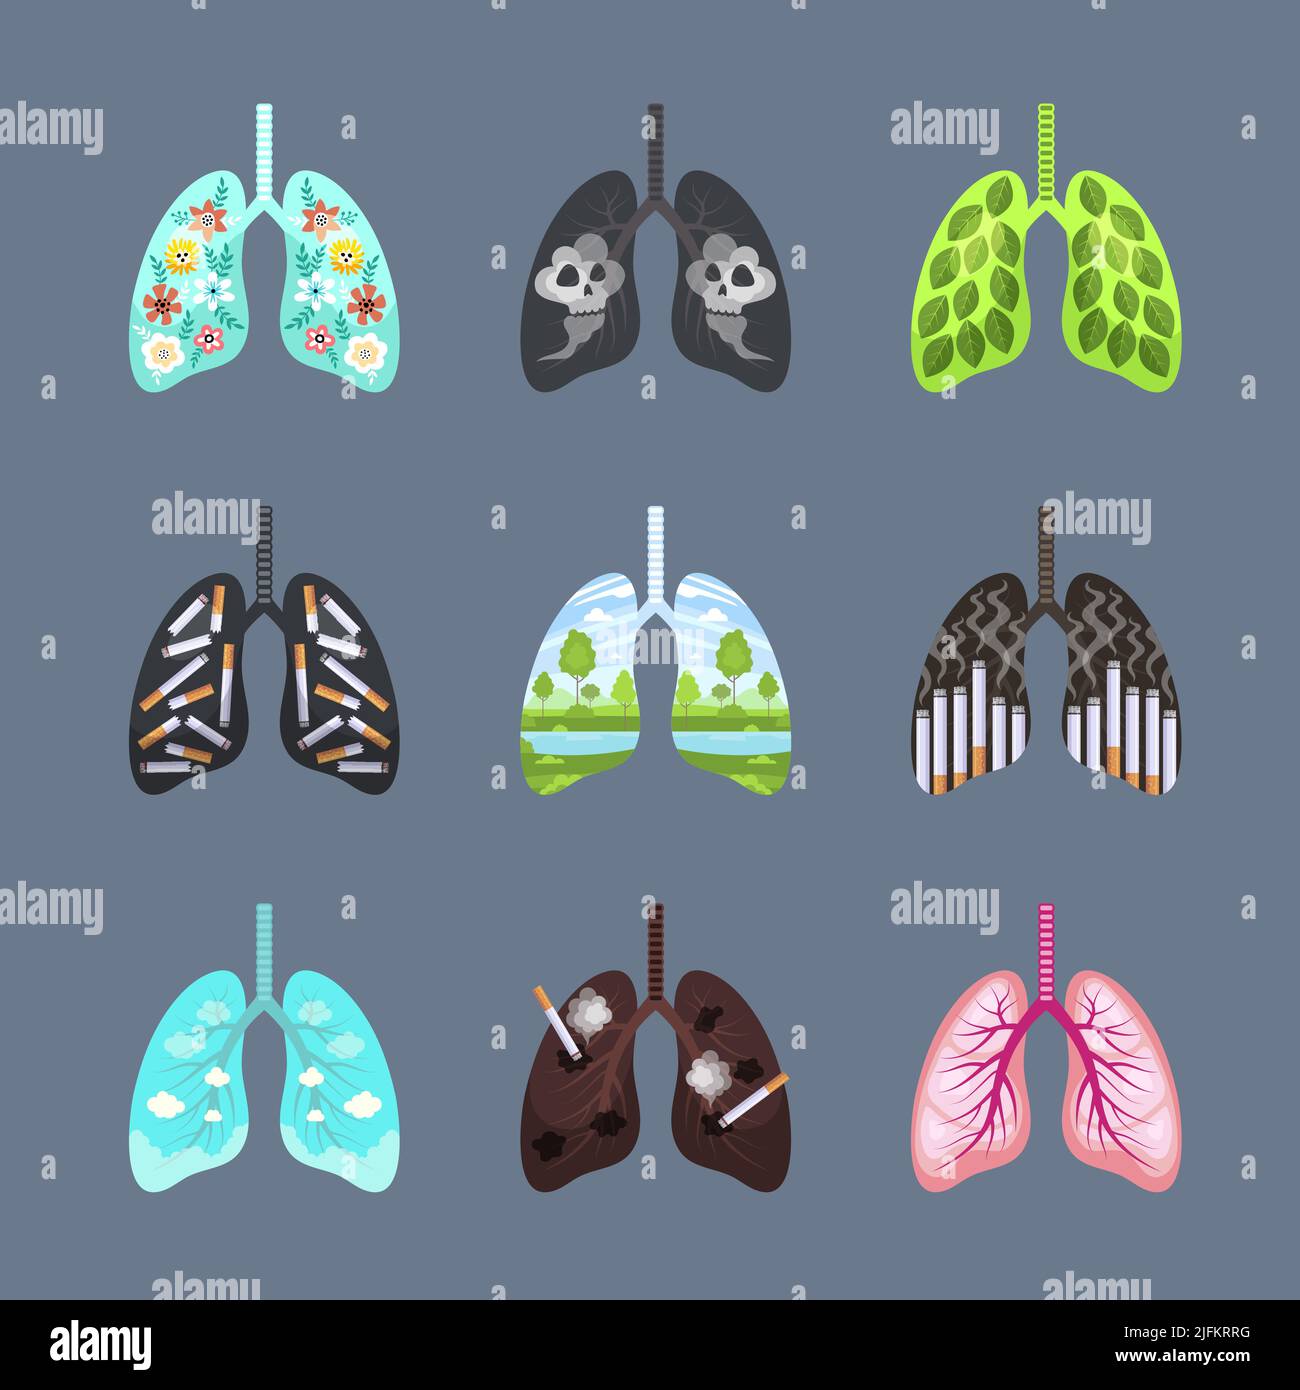 Unhealthy lungs. Concept illustrations of healthy and damaged from tobacco lungs organism pollution destroyer human systems recent vector templates Stock Vector